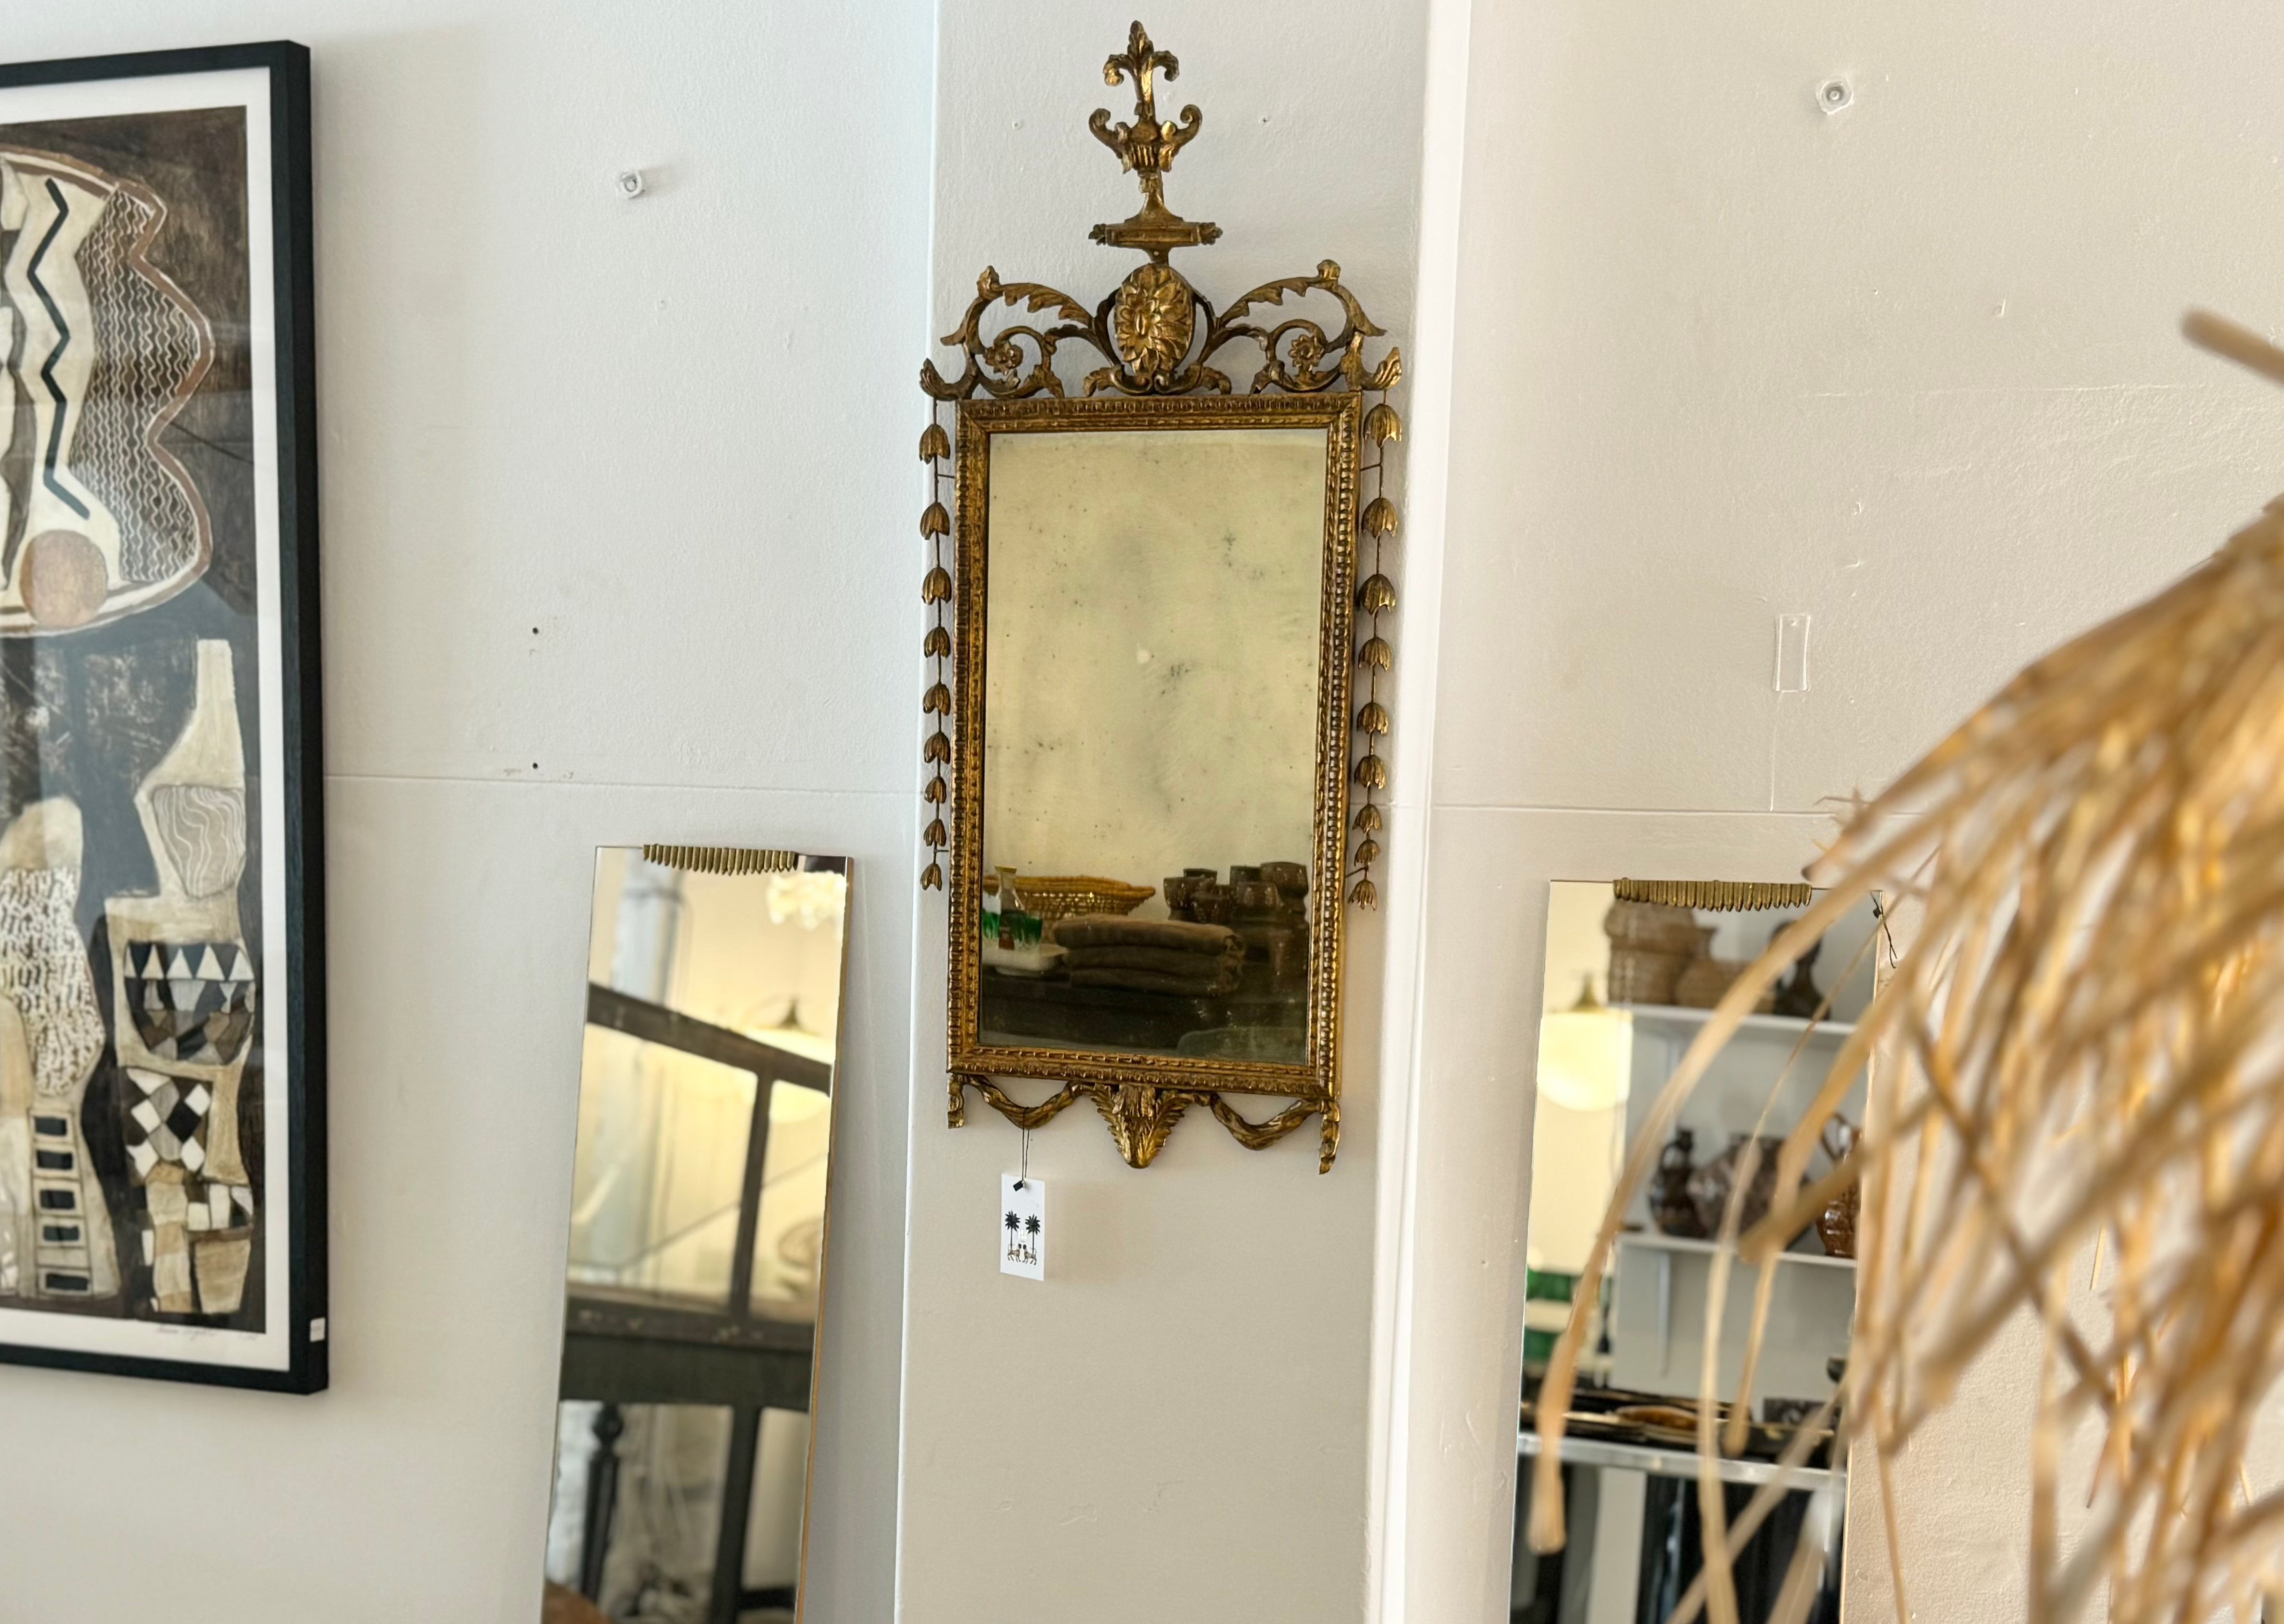 Late 19th century Firenze Italy, style of Louis XVI mirror